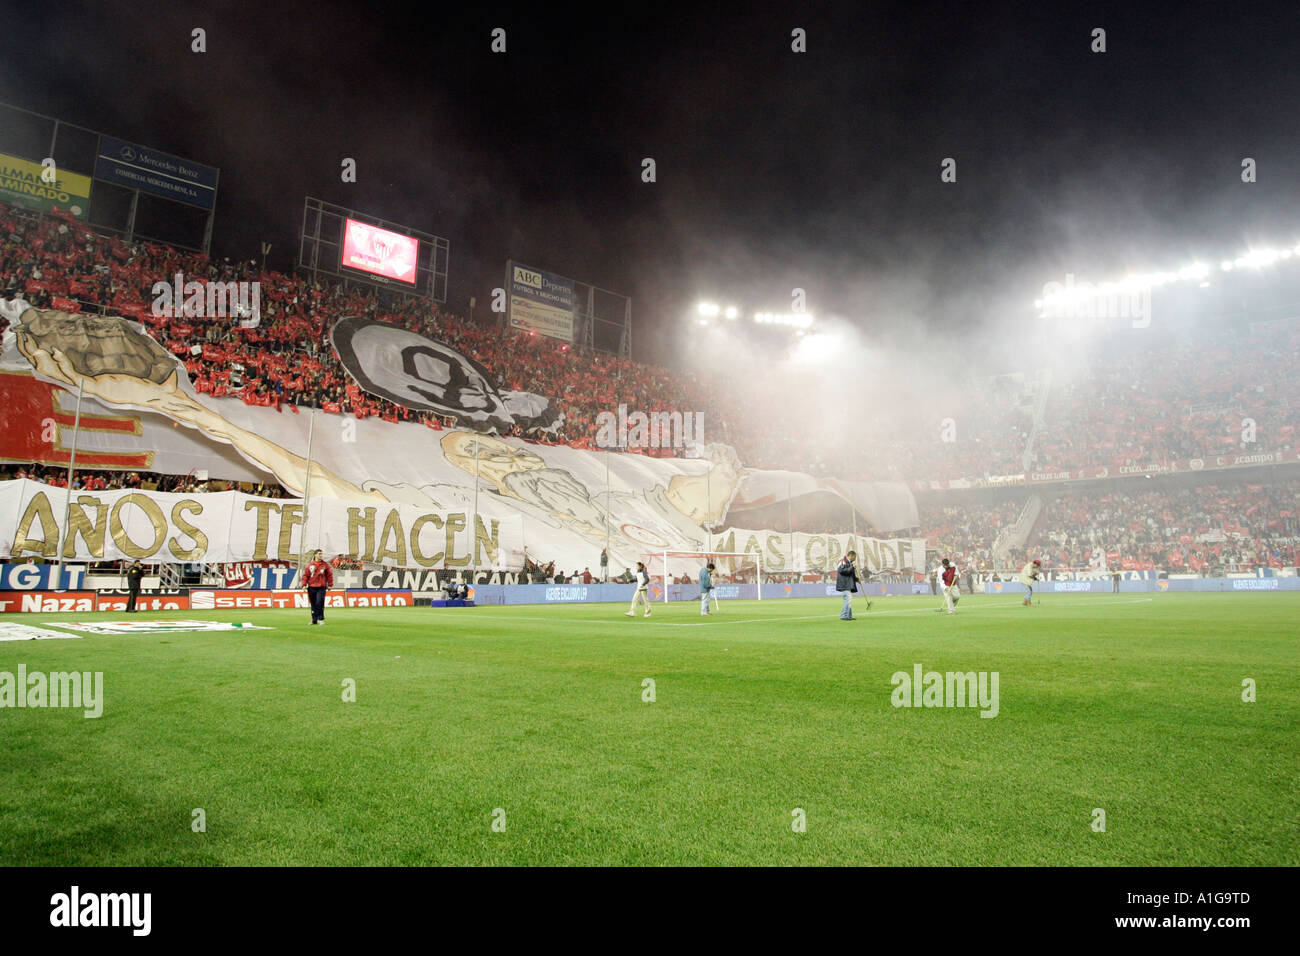 Sevilla FC fans make a huge tifo before local derby against Real Betis Balompie Stock Photo